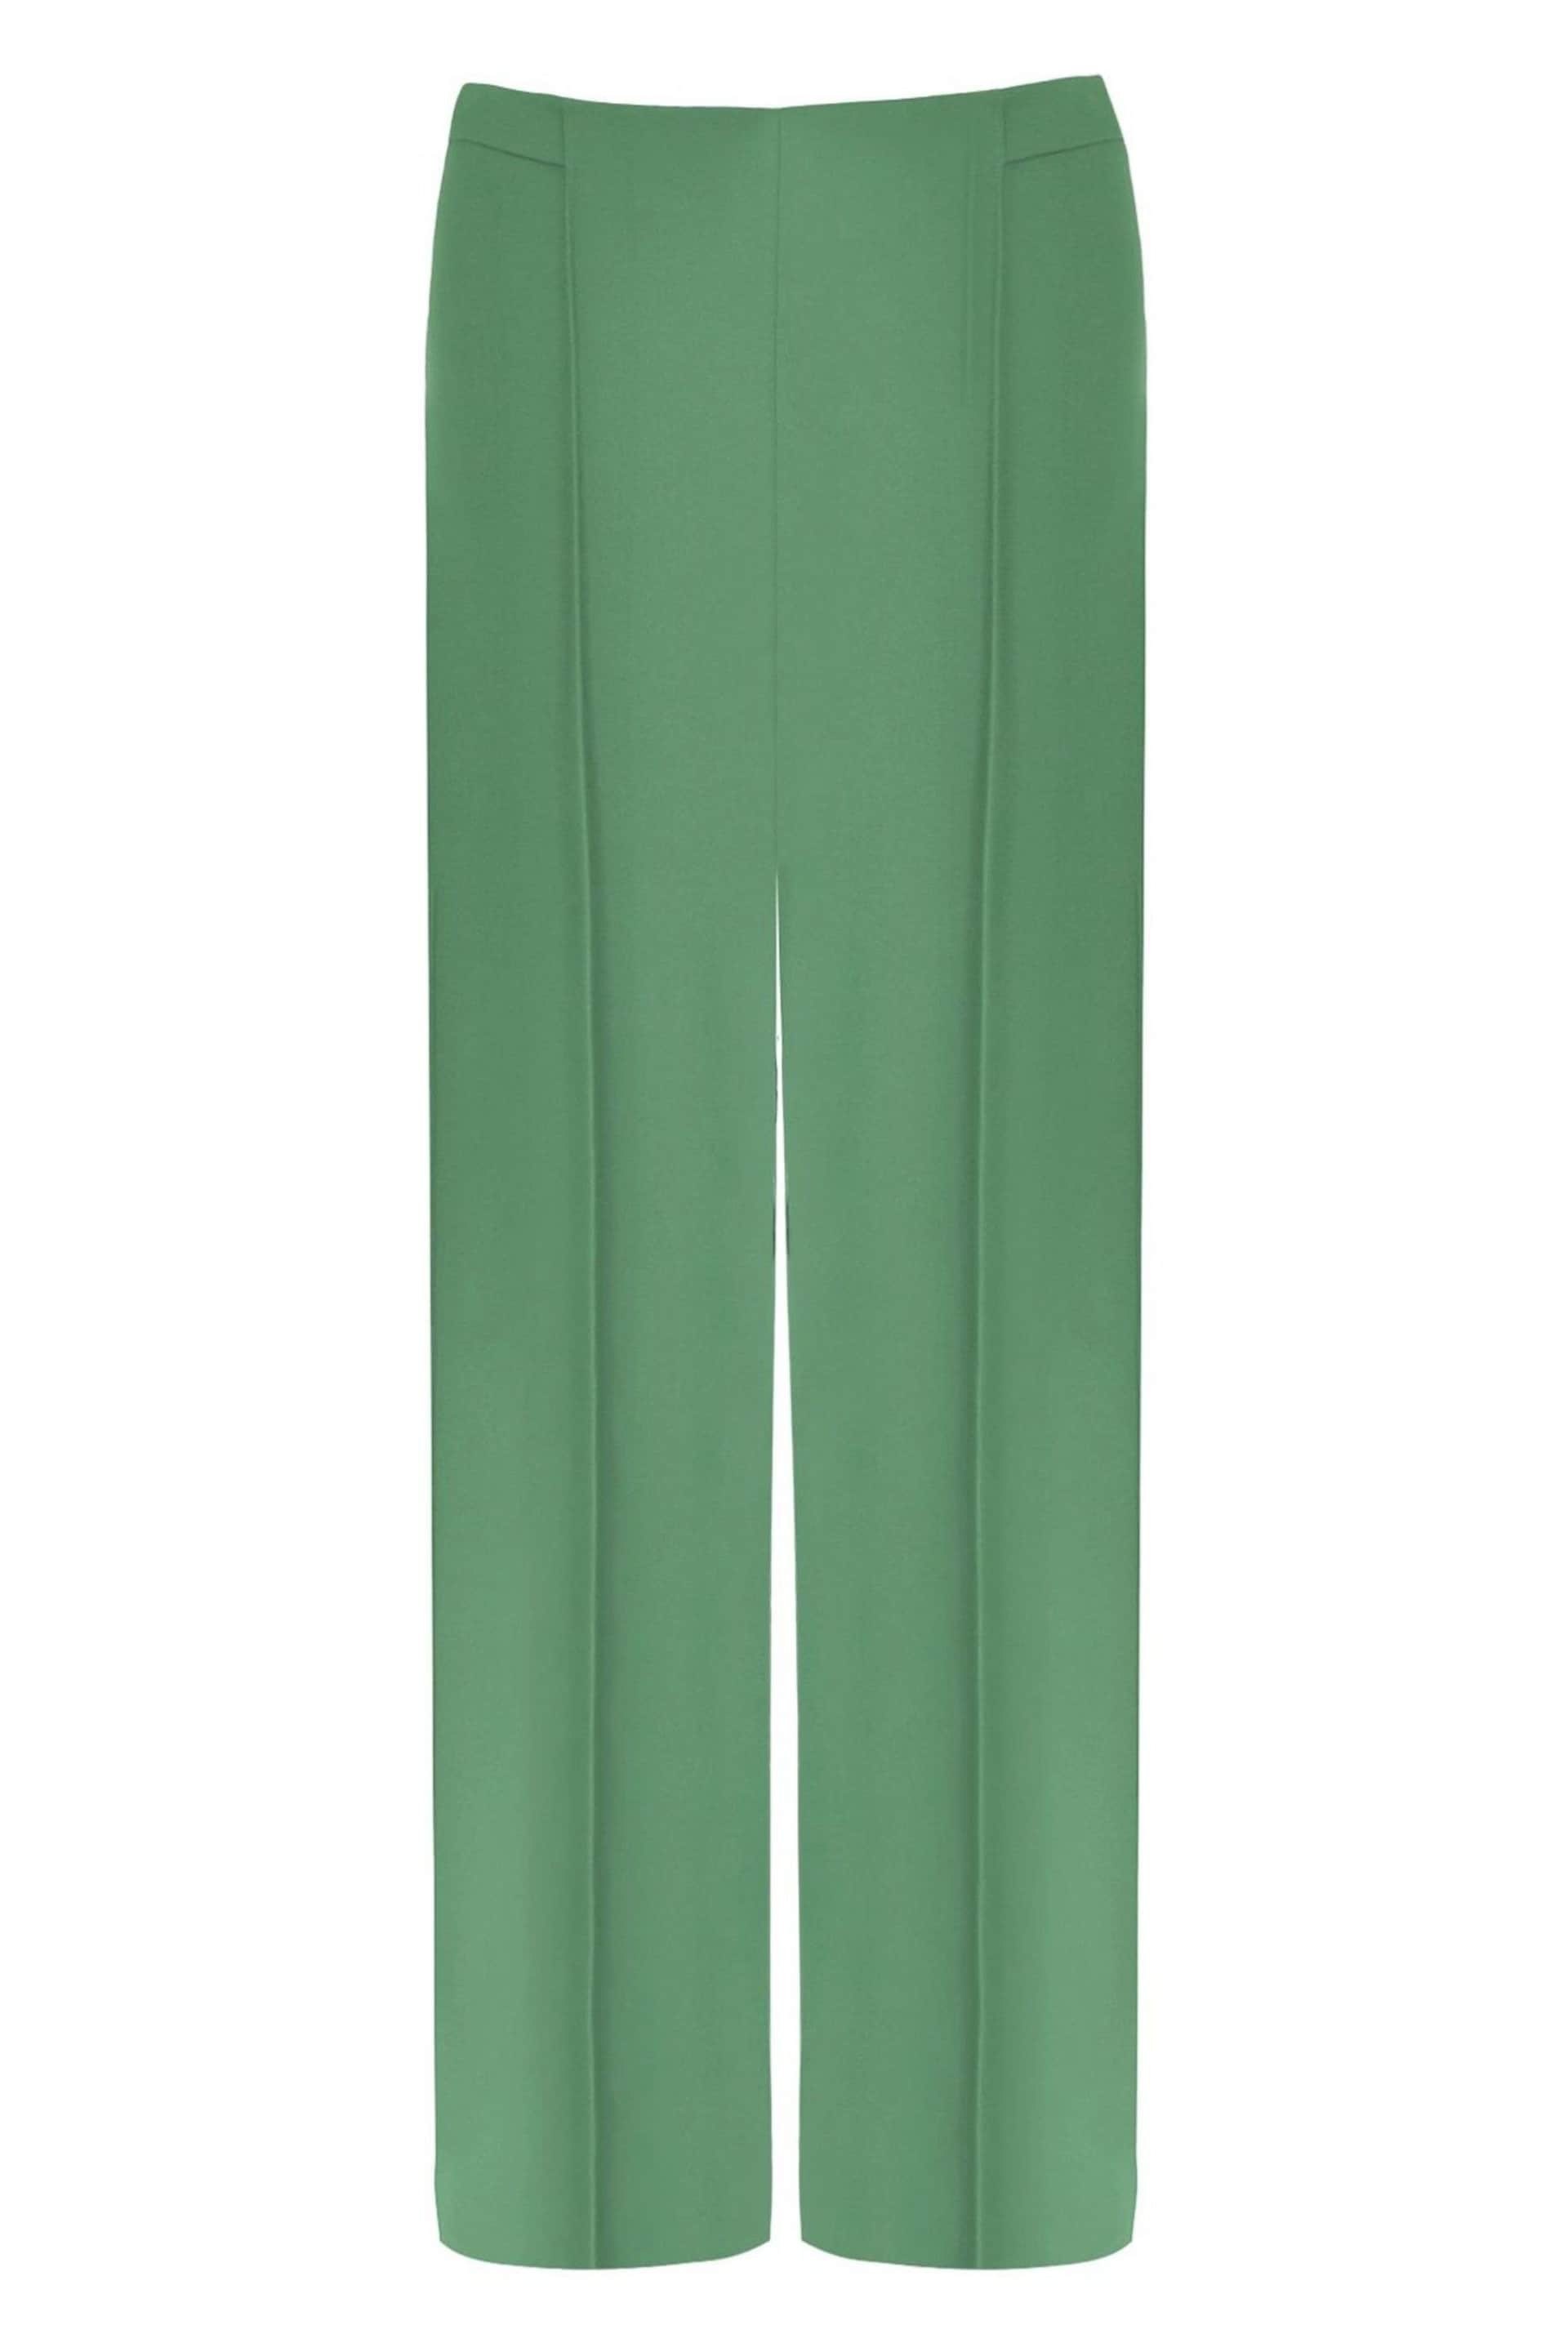 Ro&Zo Green Suit: Trousers - Image 5 of 5